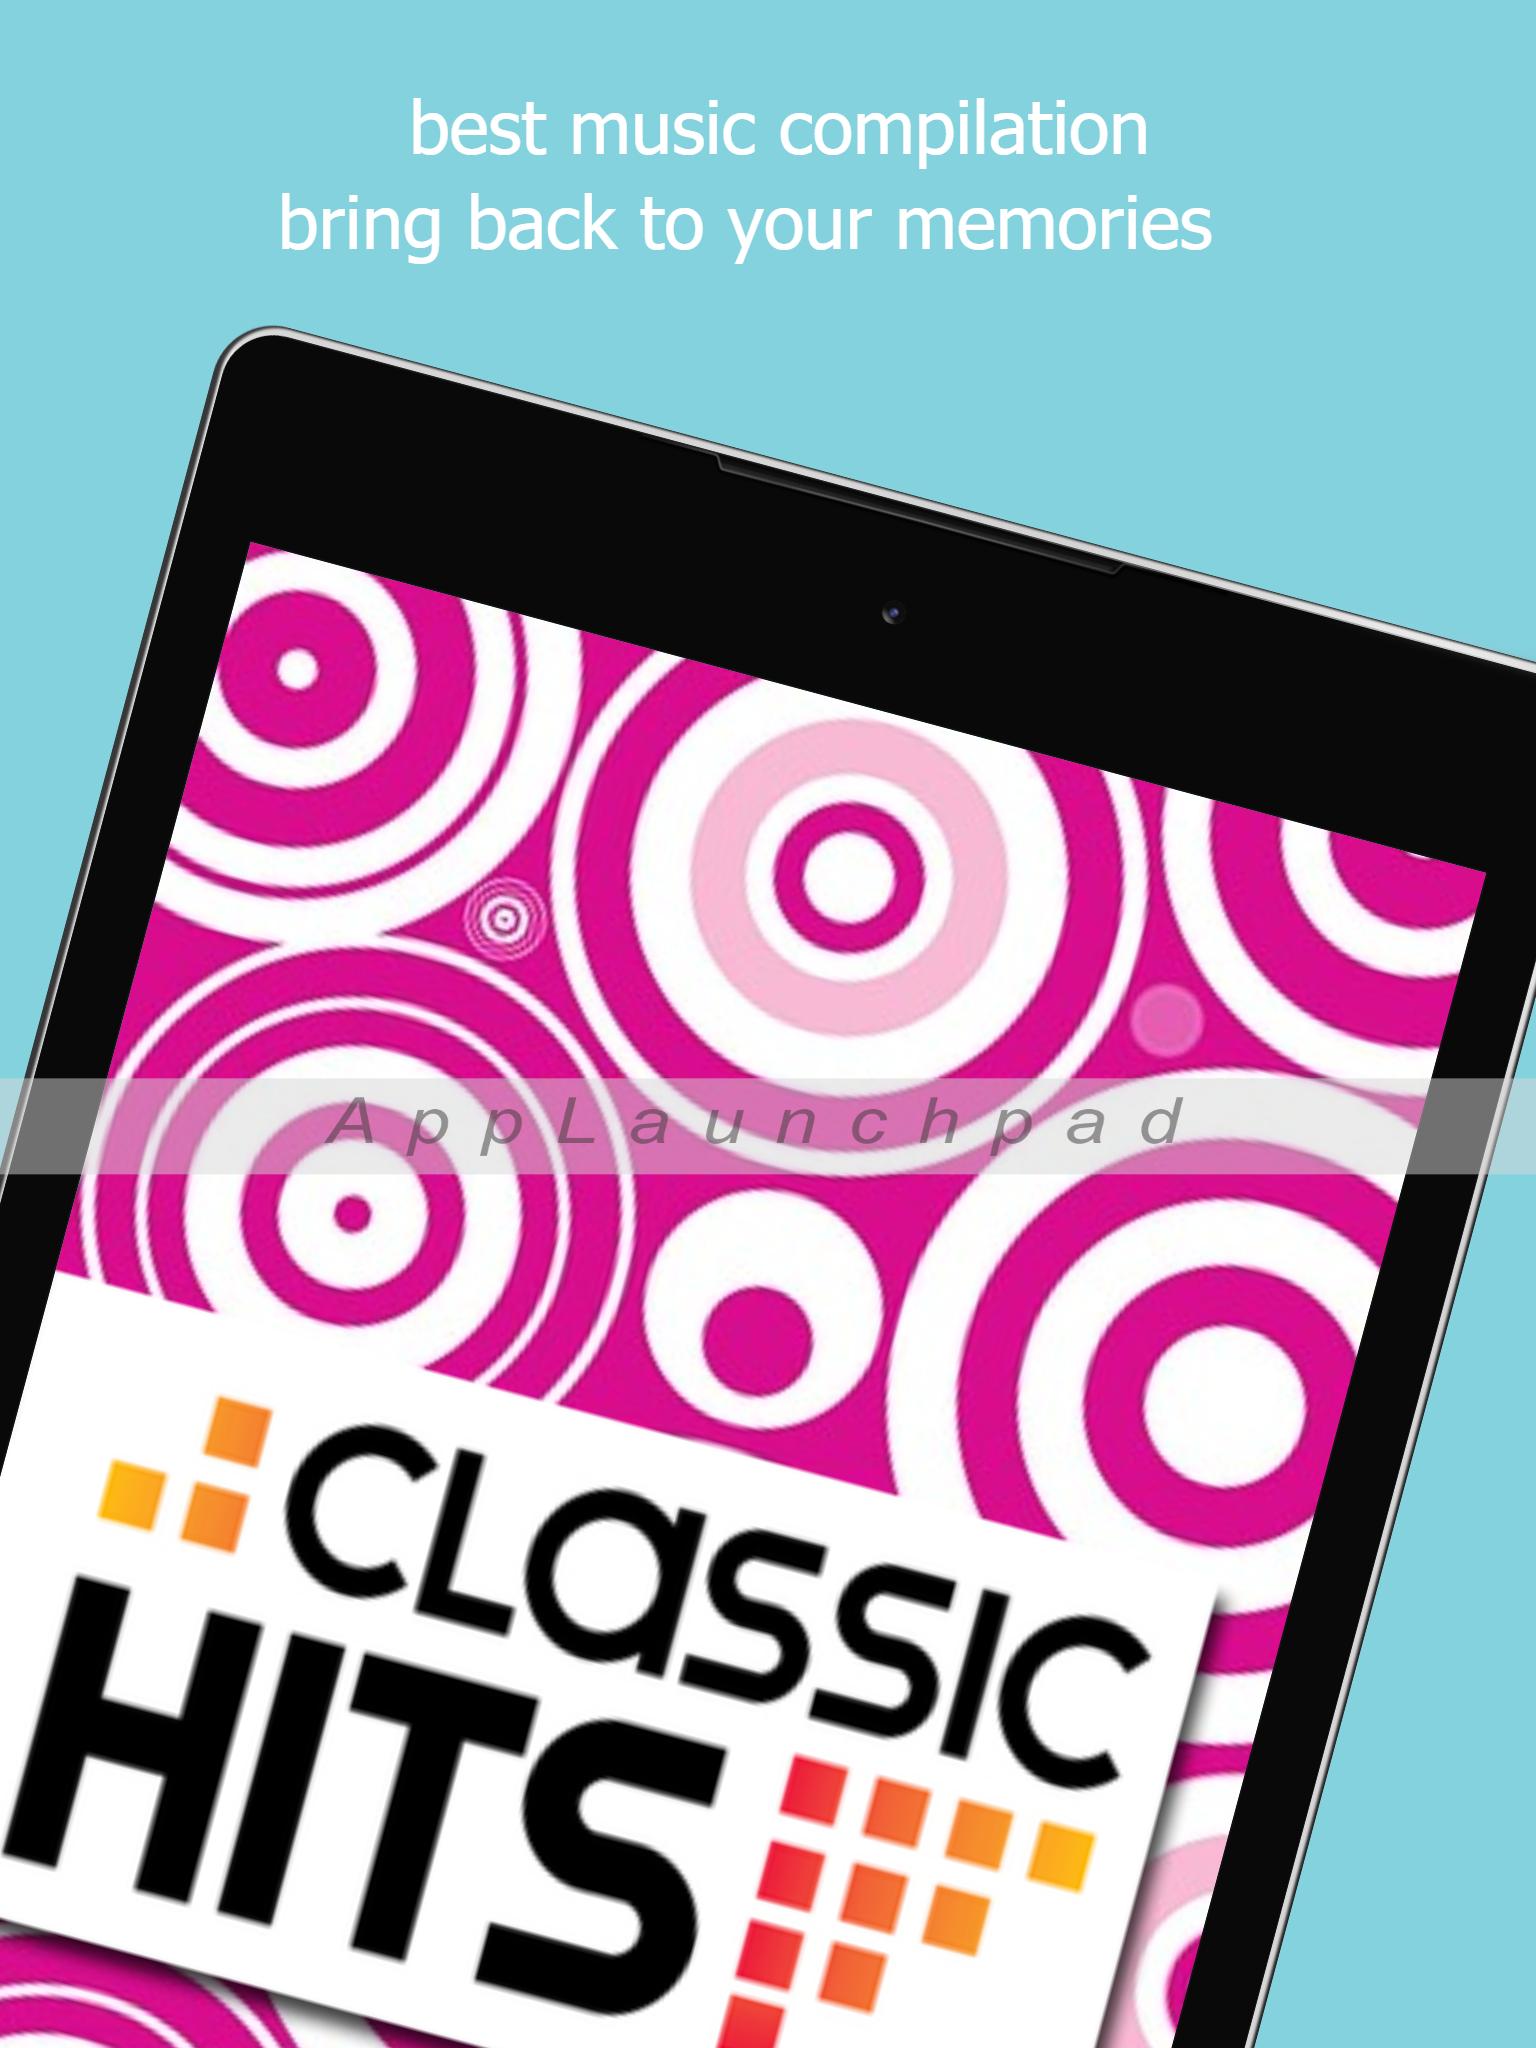 Songs Lyrics For Carlos Santana Greatest Hits For Android Apk Download